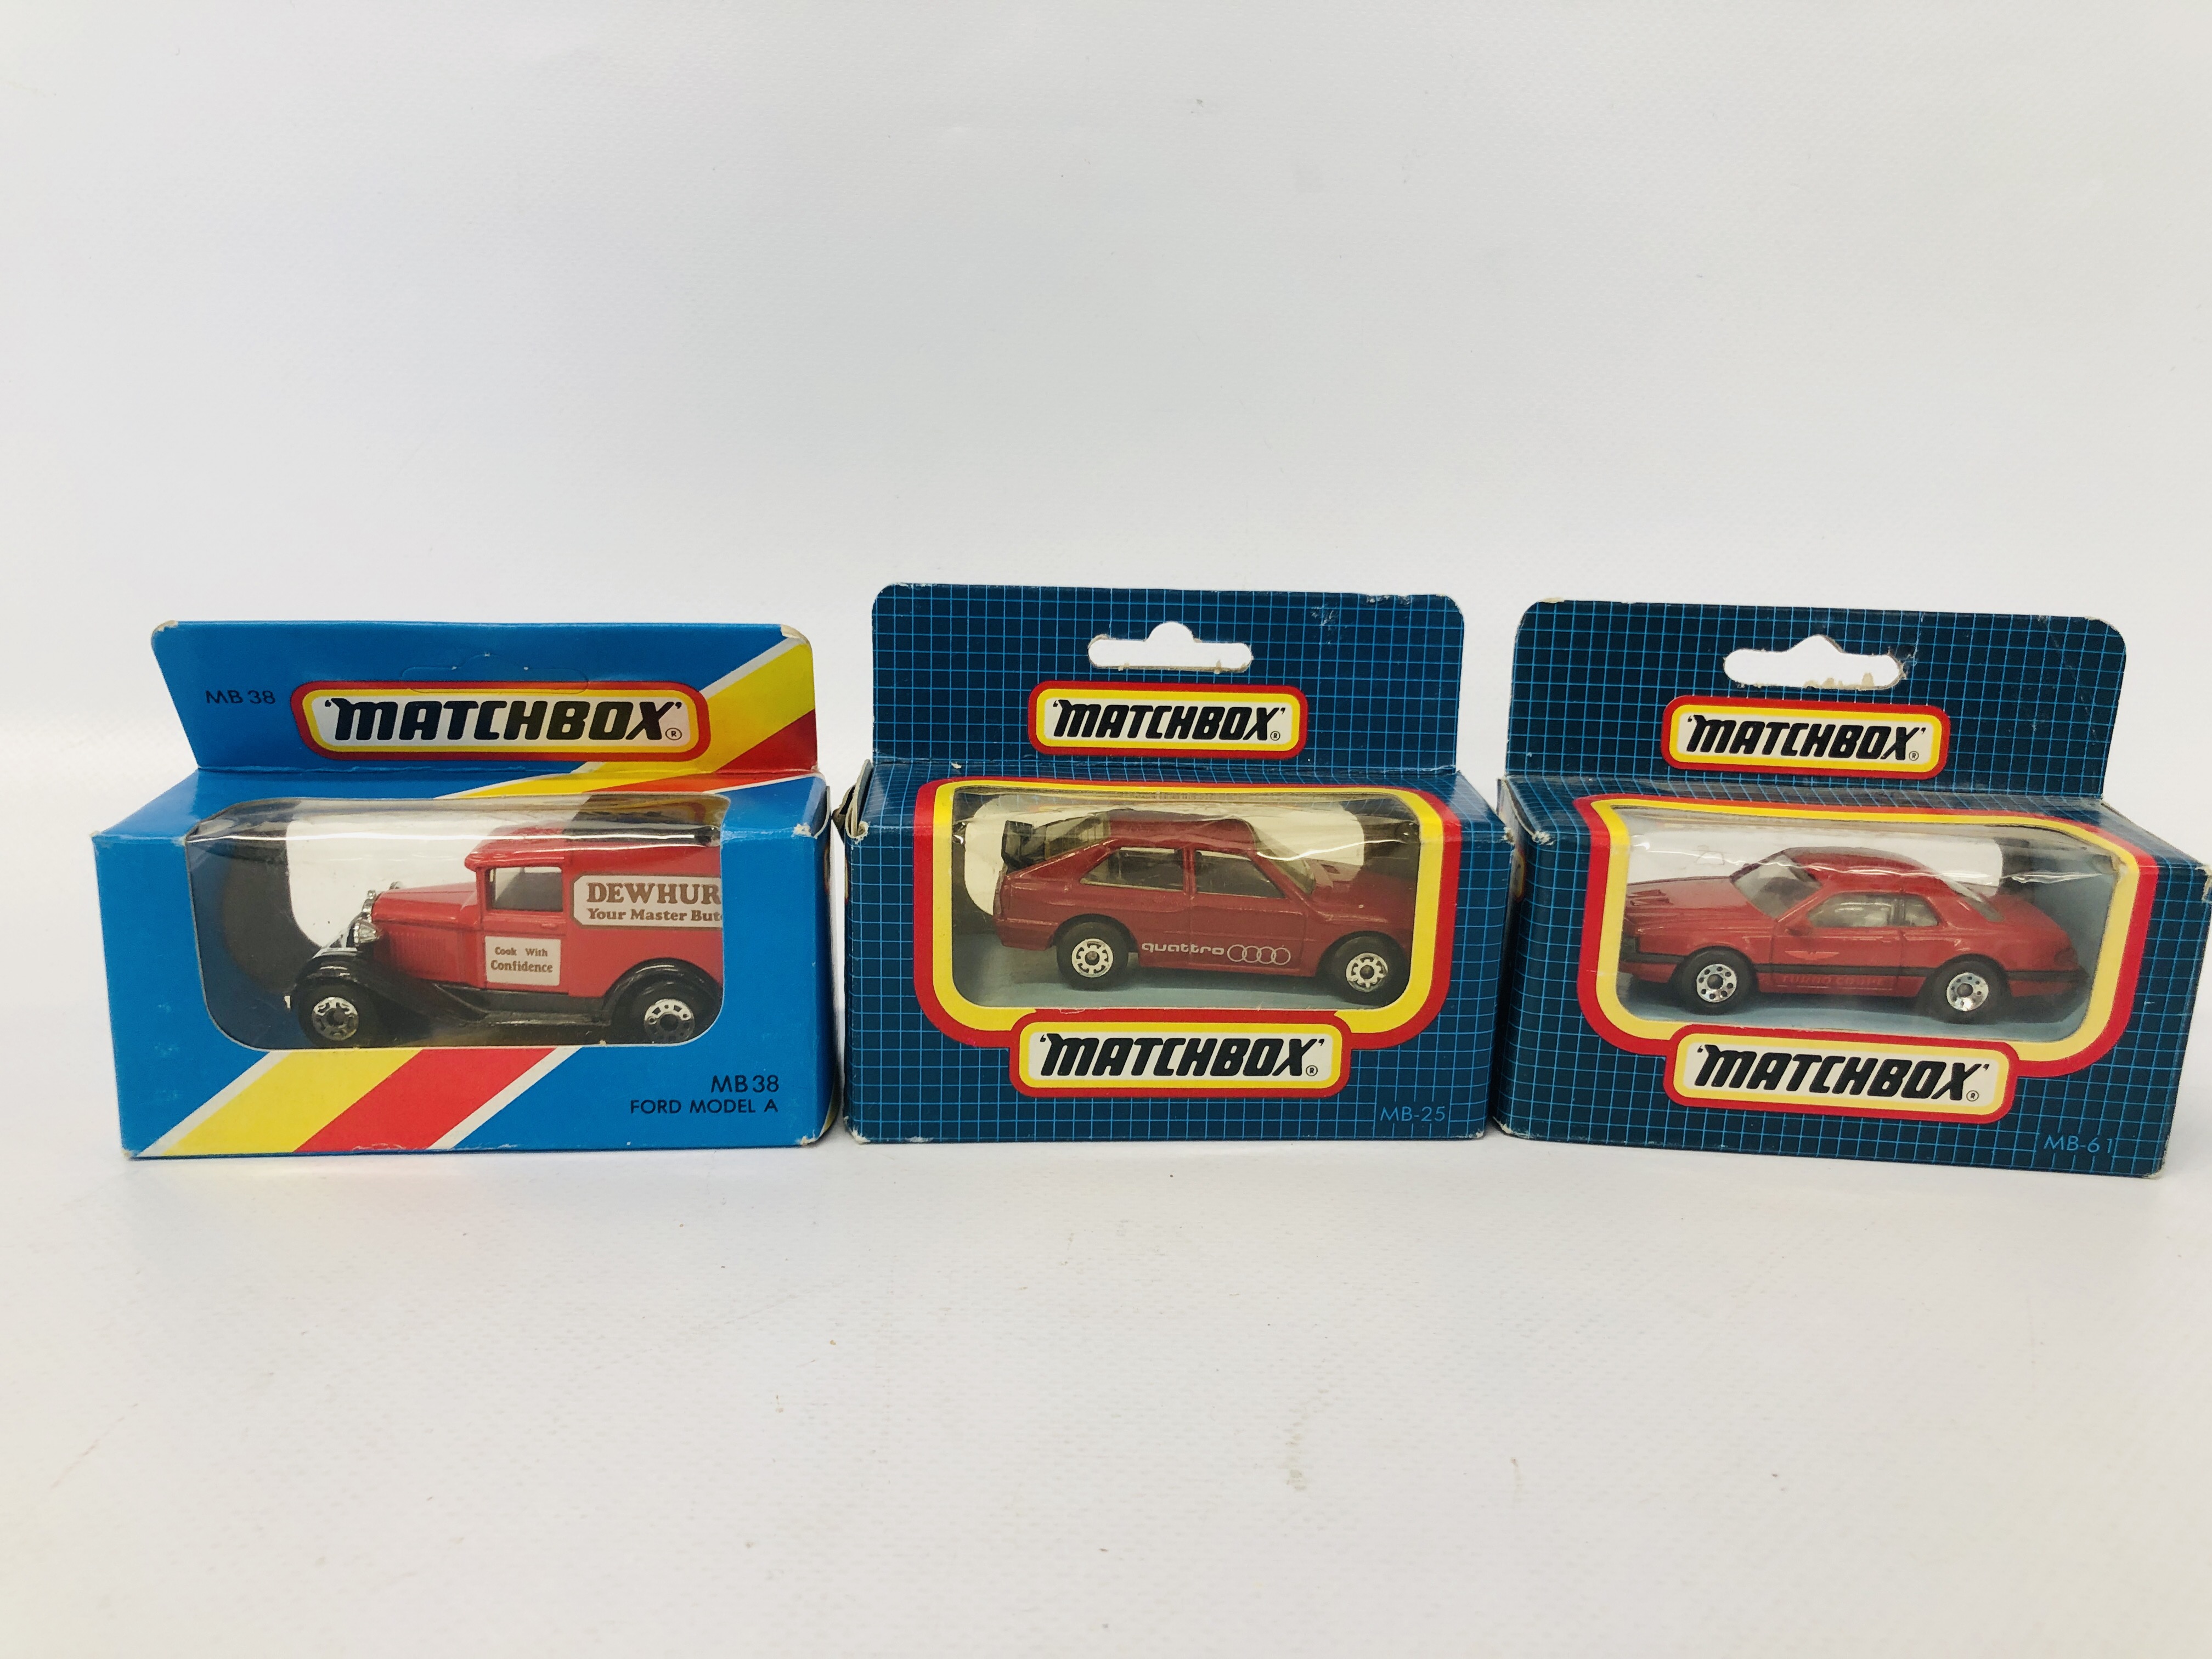 COLLECTION OF VINTAGE MATCHBOX COLLECTORS DIE-CAST MODEL VEHICLES IN ORIGINAL BOXES - Image 5 of 8